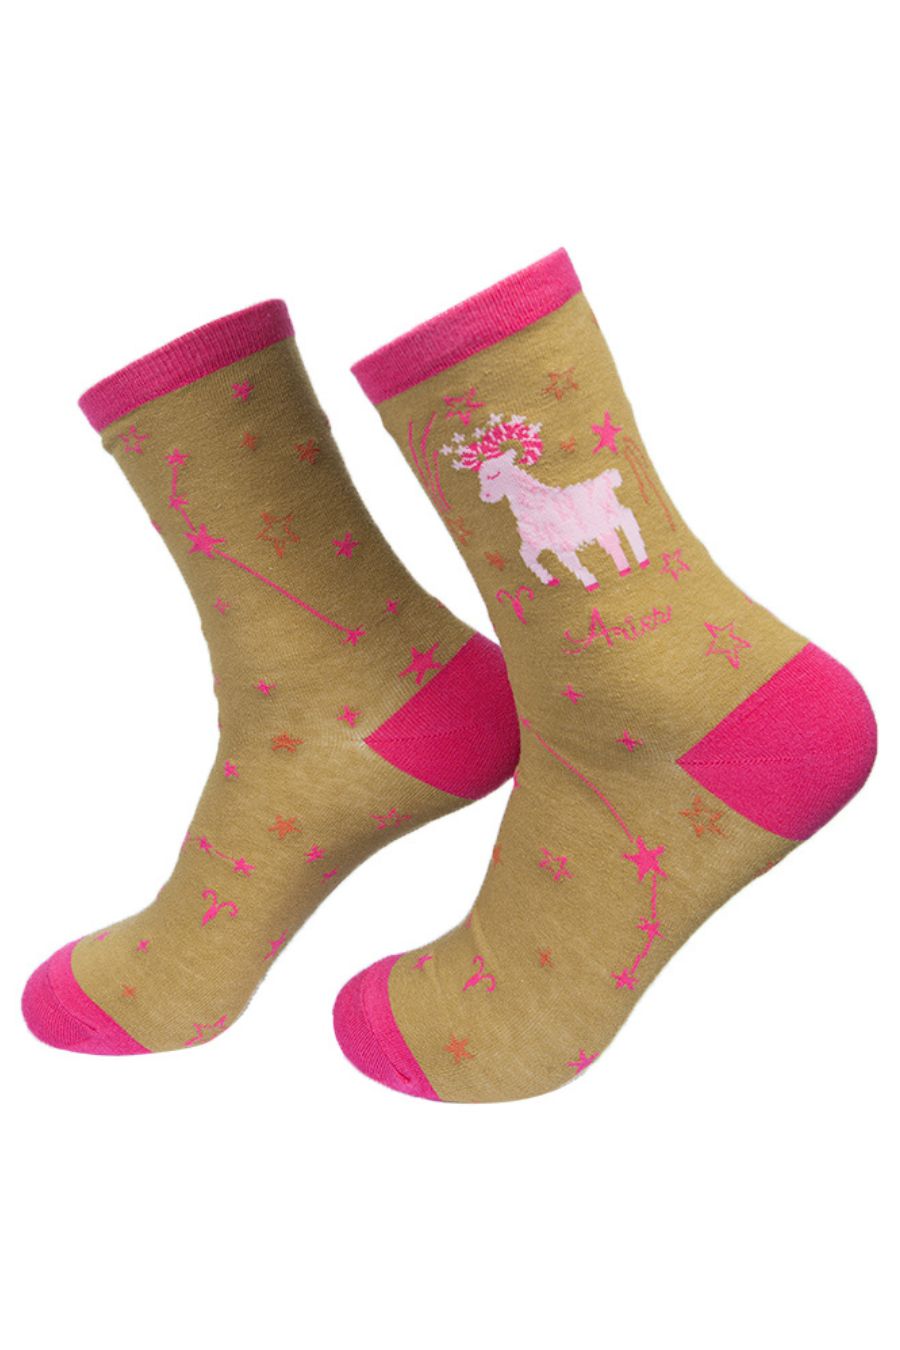 mustard yellow, pink bamboo socks depicting the zodiac sign and celectial constellation of aries